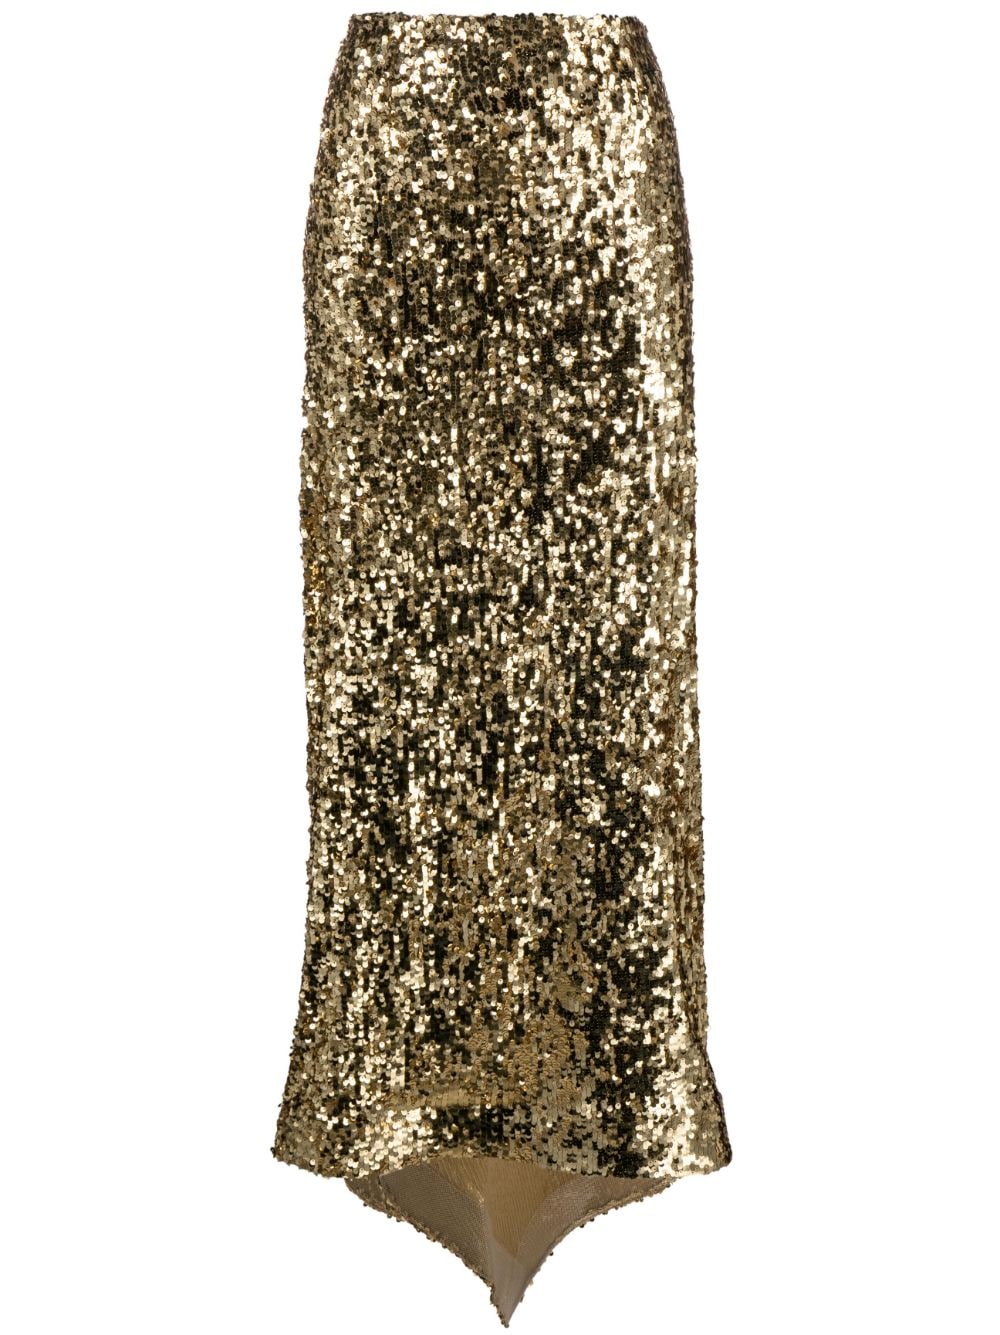 Atu Body Couture sequin-embellished maxi skirt - Gold